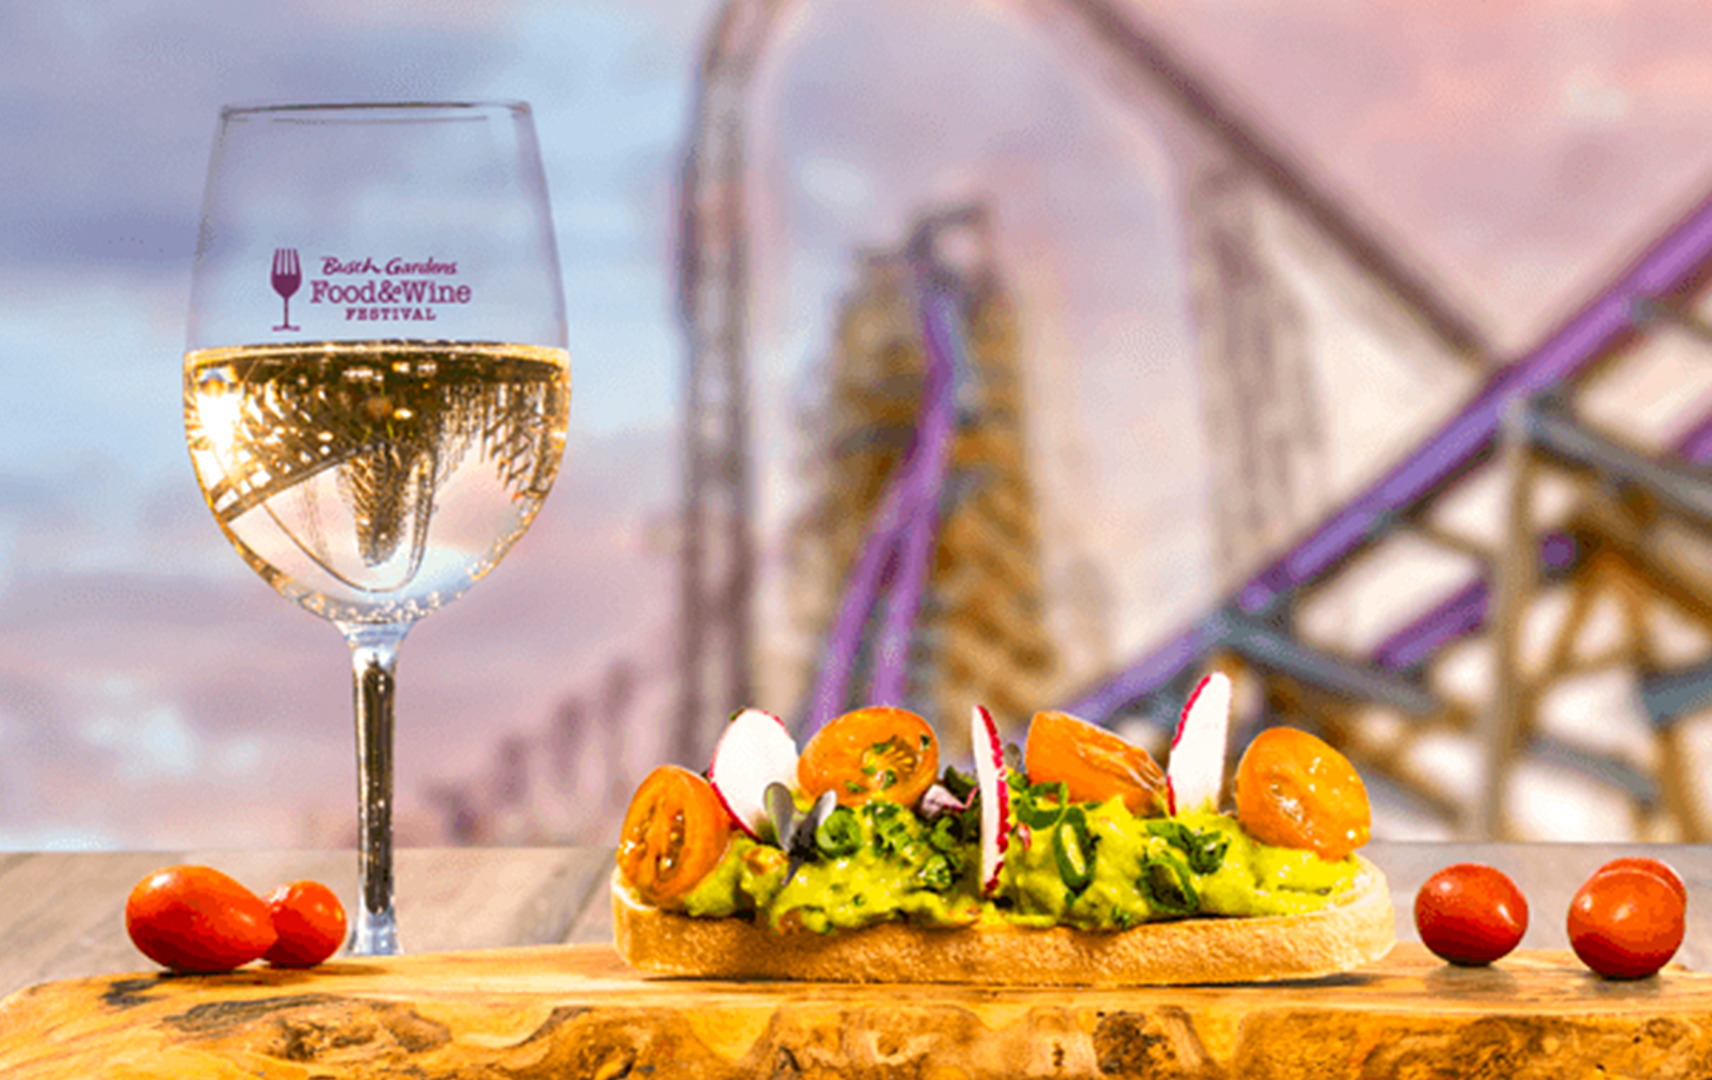 Menu Items & Cabin Names for the 2020 Busch Gardens Food and Wine Festival